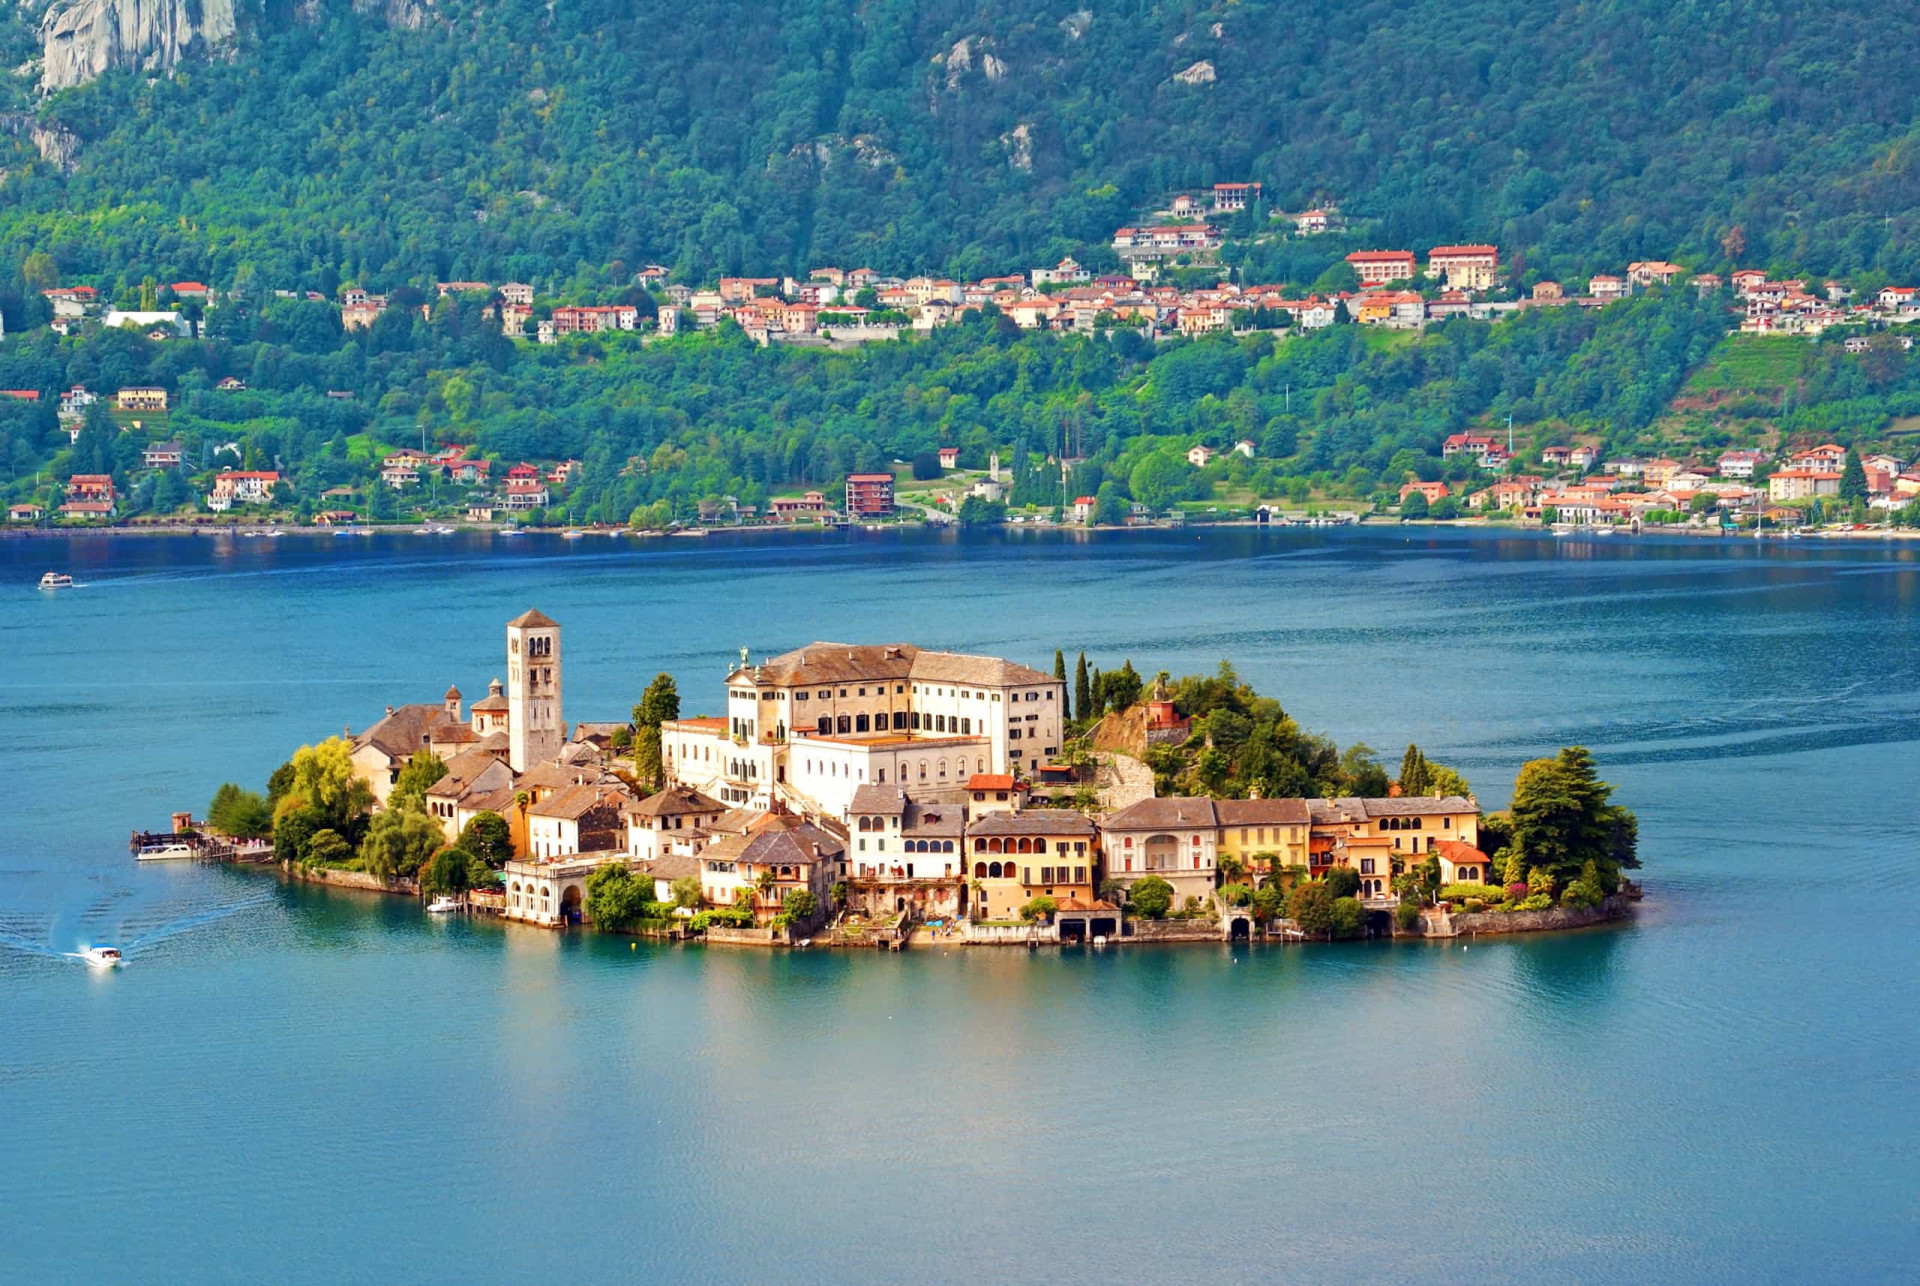 <p>The ancient village of Orta San Giulio is especially known for Isola di San Giulio, an island set within Lake Orta on which nestles the Basilica di San Giulio.</p>